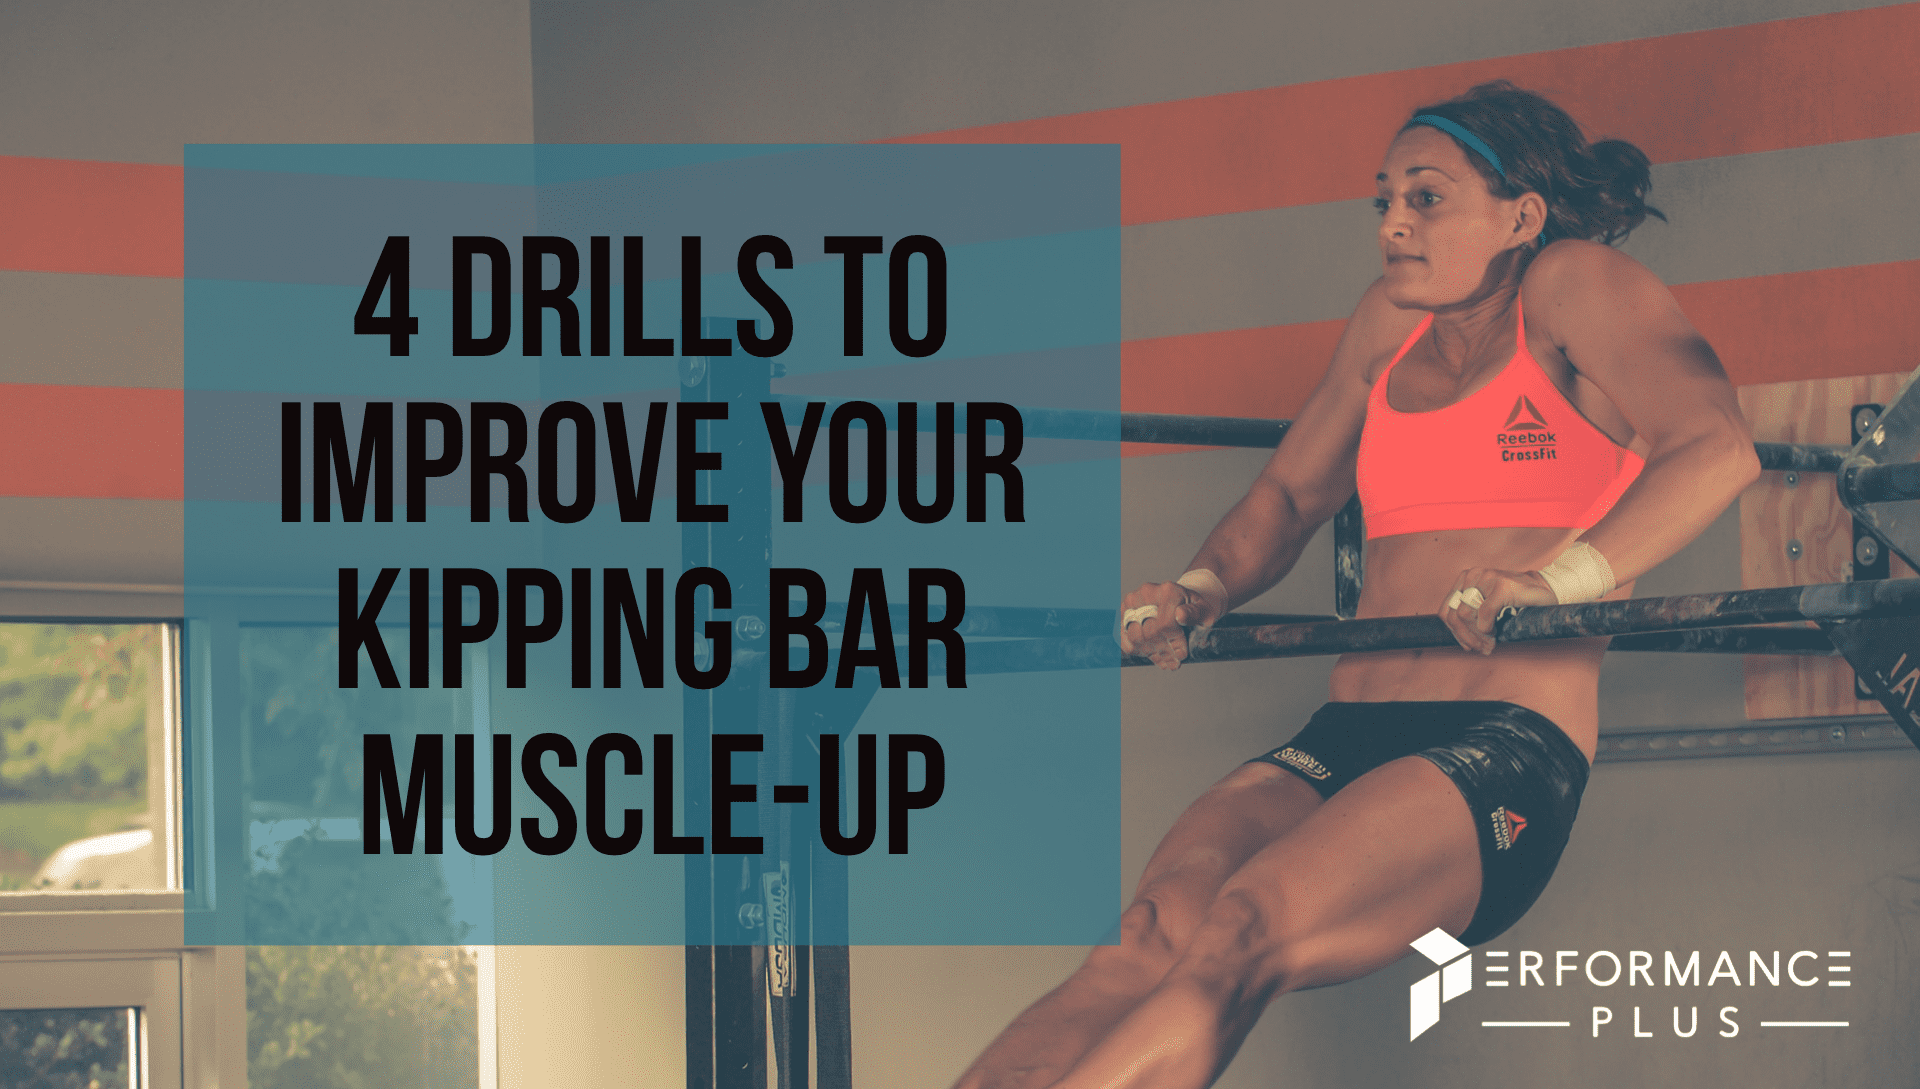 Featured image for “4 DRILLS TO IMPROVE YOUR KIPPING BAR MUSCLE-UP”